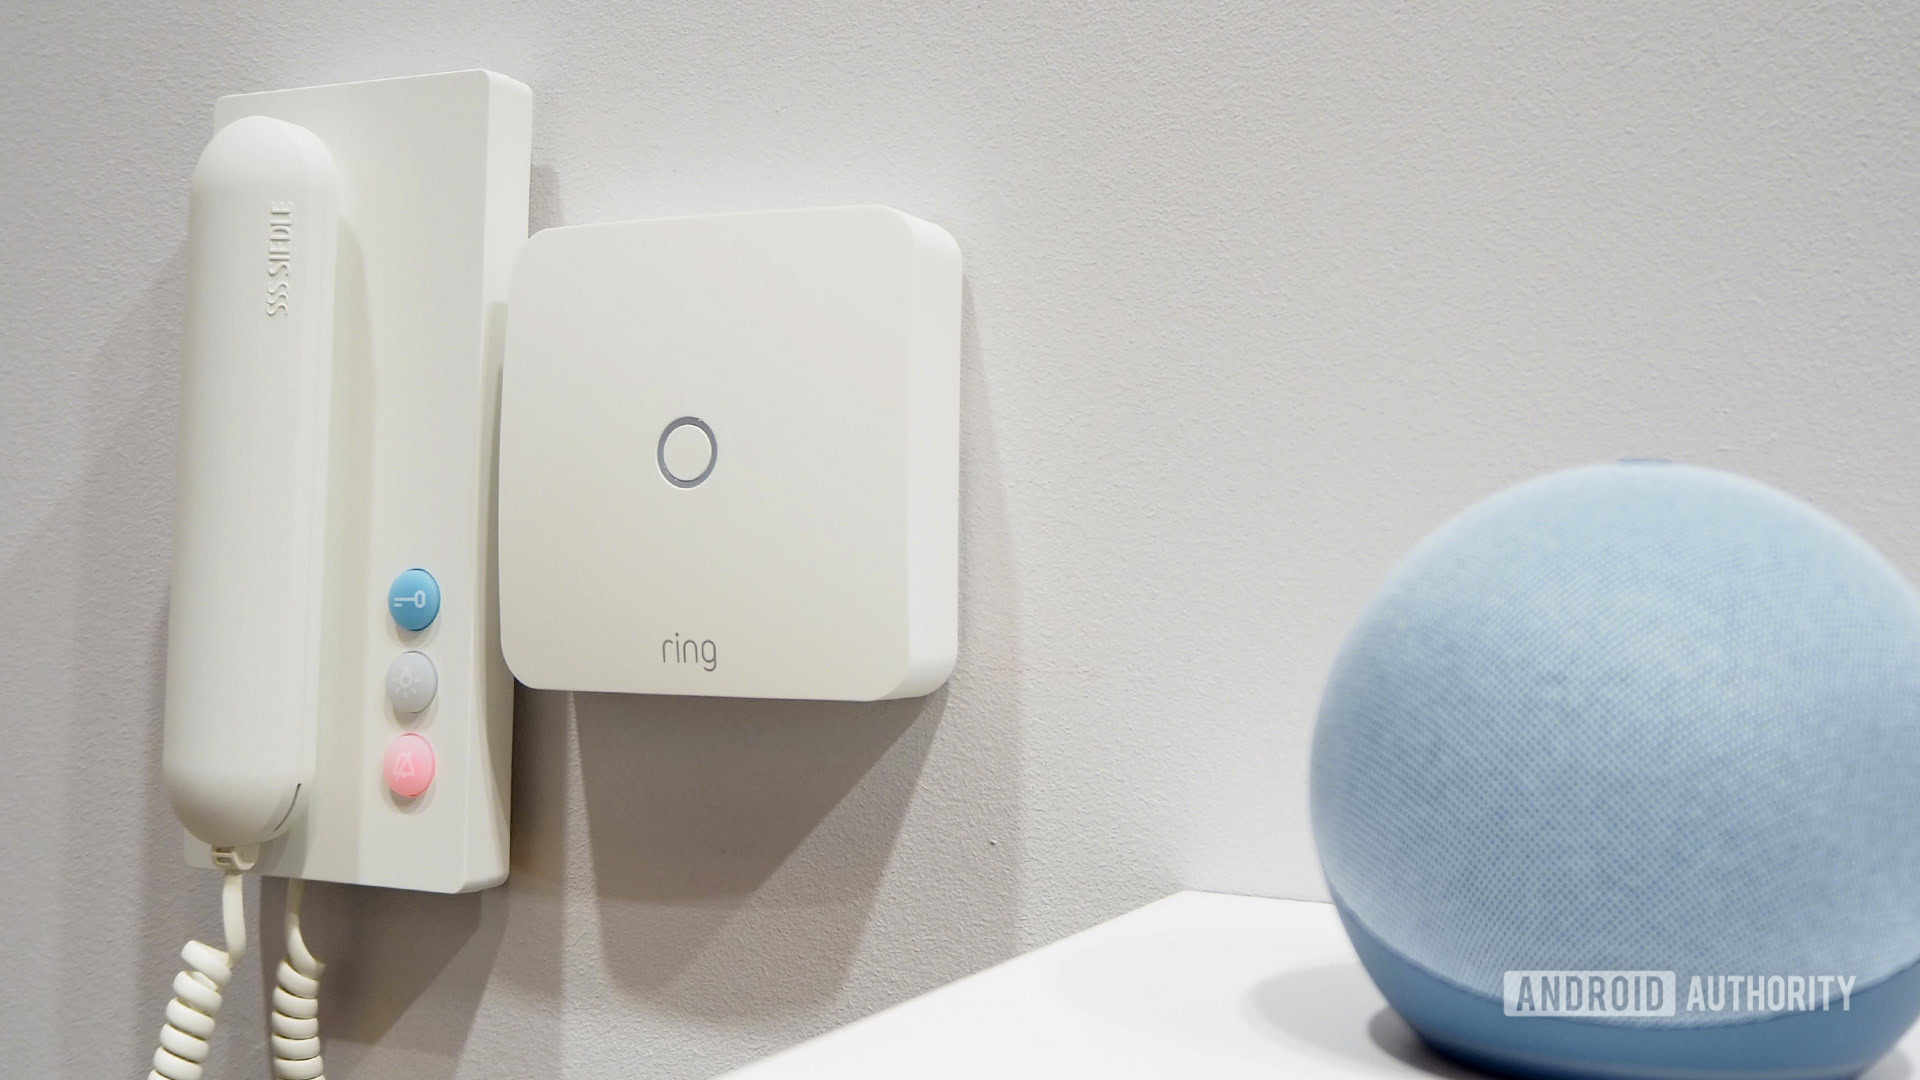 Ring Intercom hands-on: Impressive two-way audio and access control